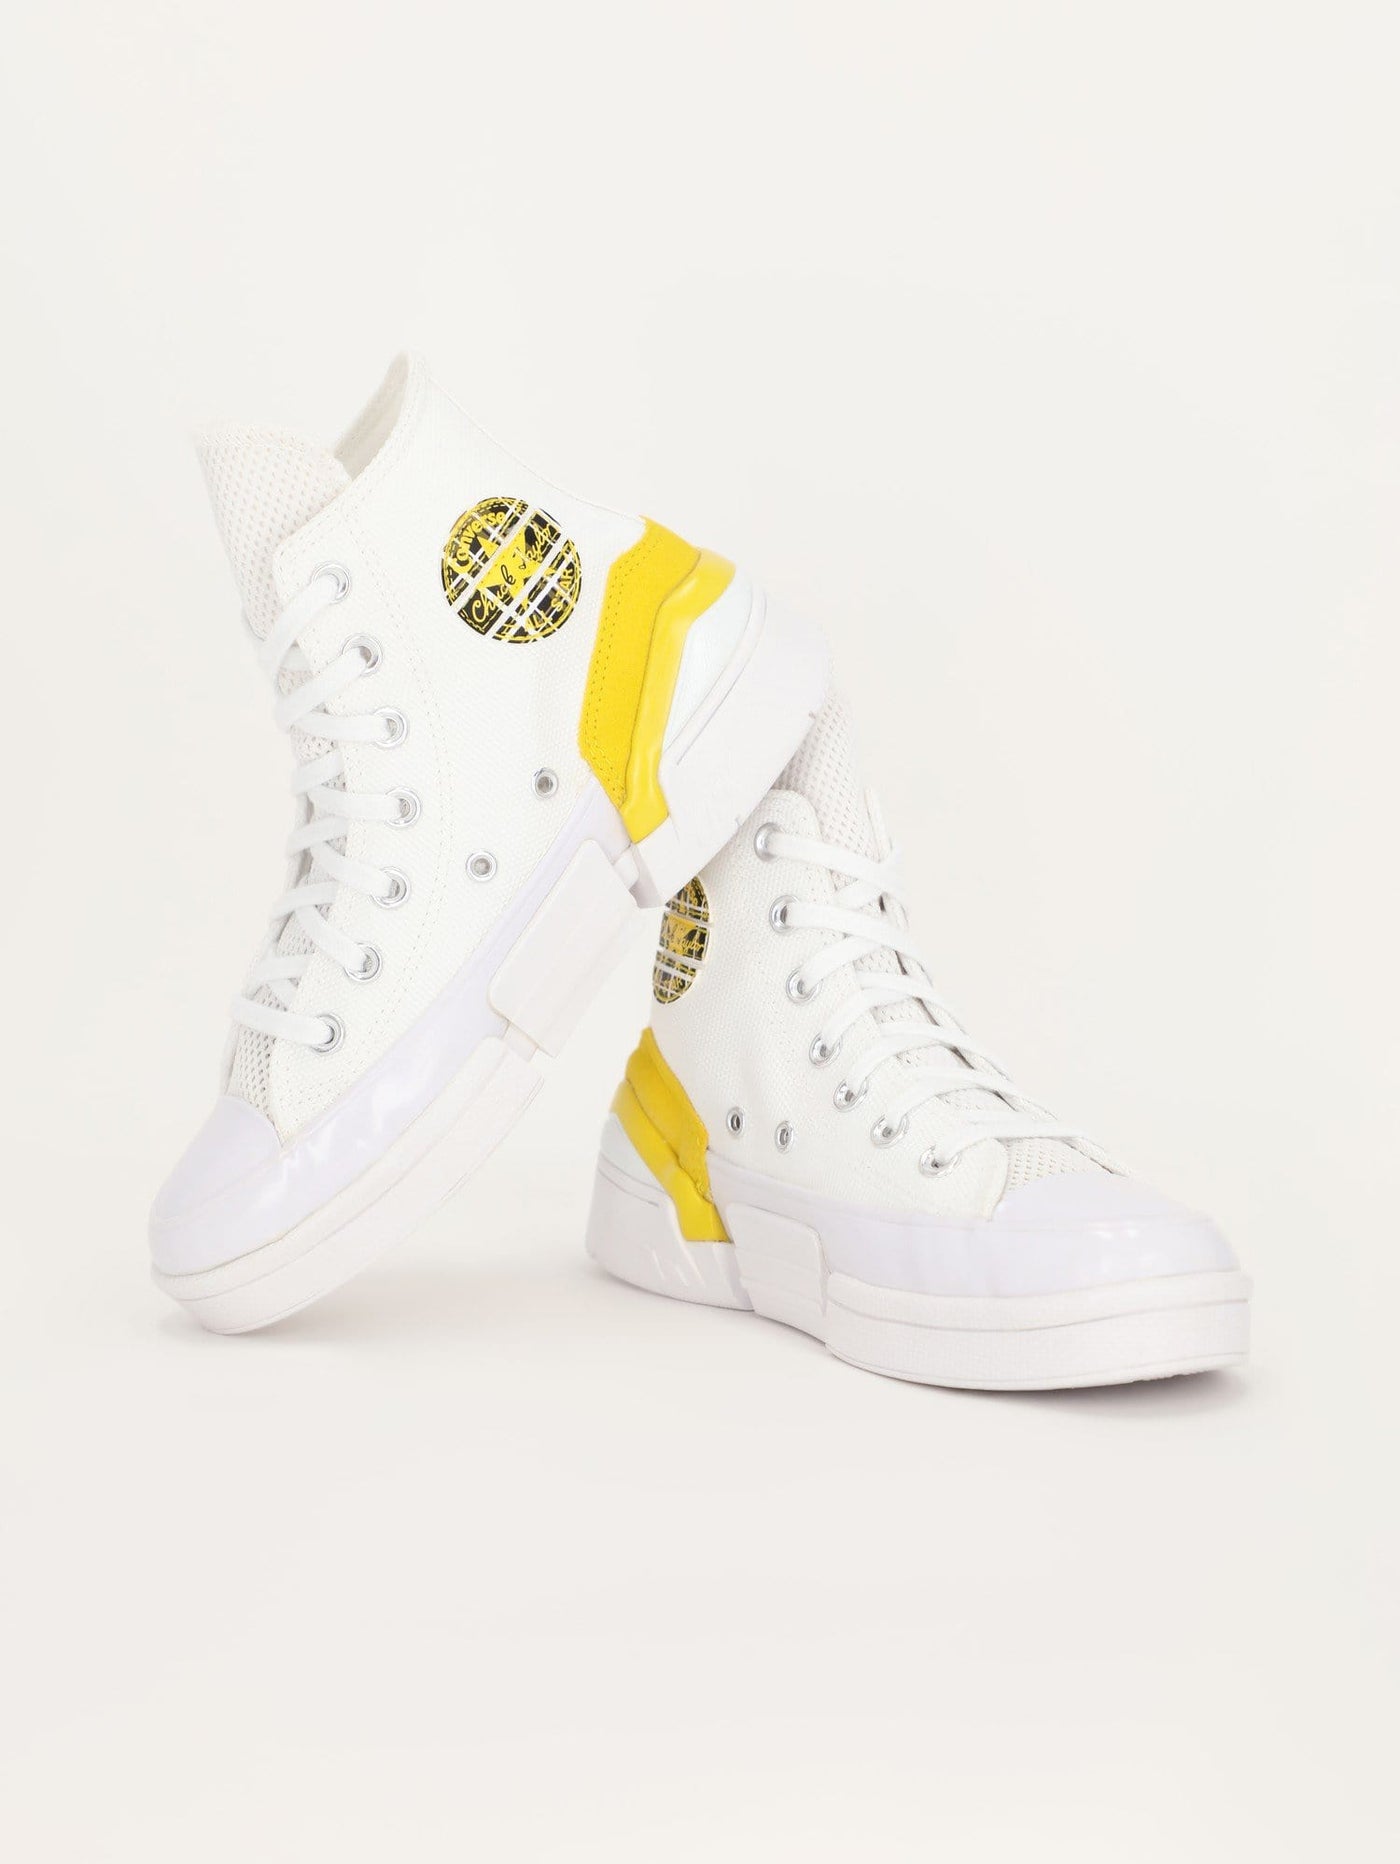 Converse Sneakers Optical White / 36 Mix and Match CPX70 High Top Sneakers - 568648C